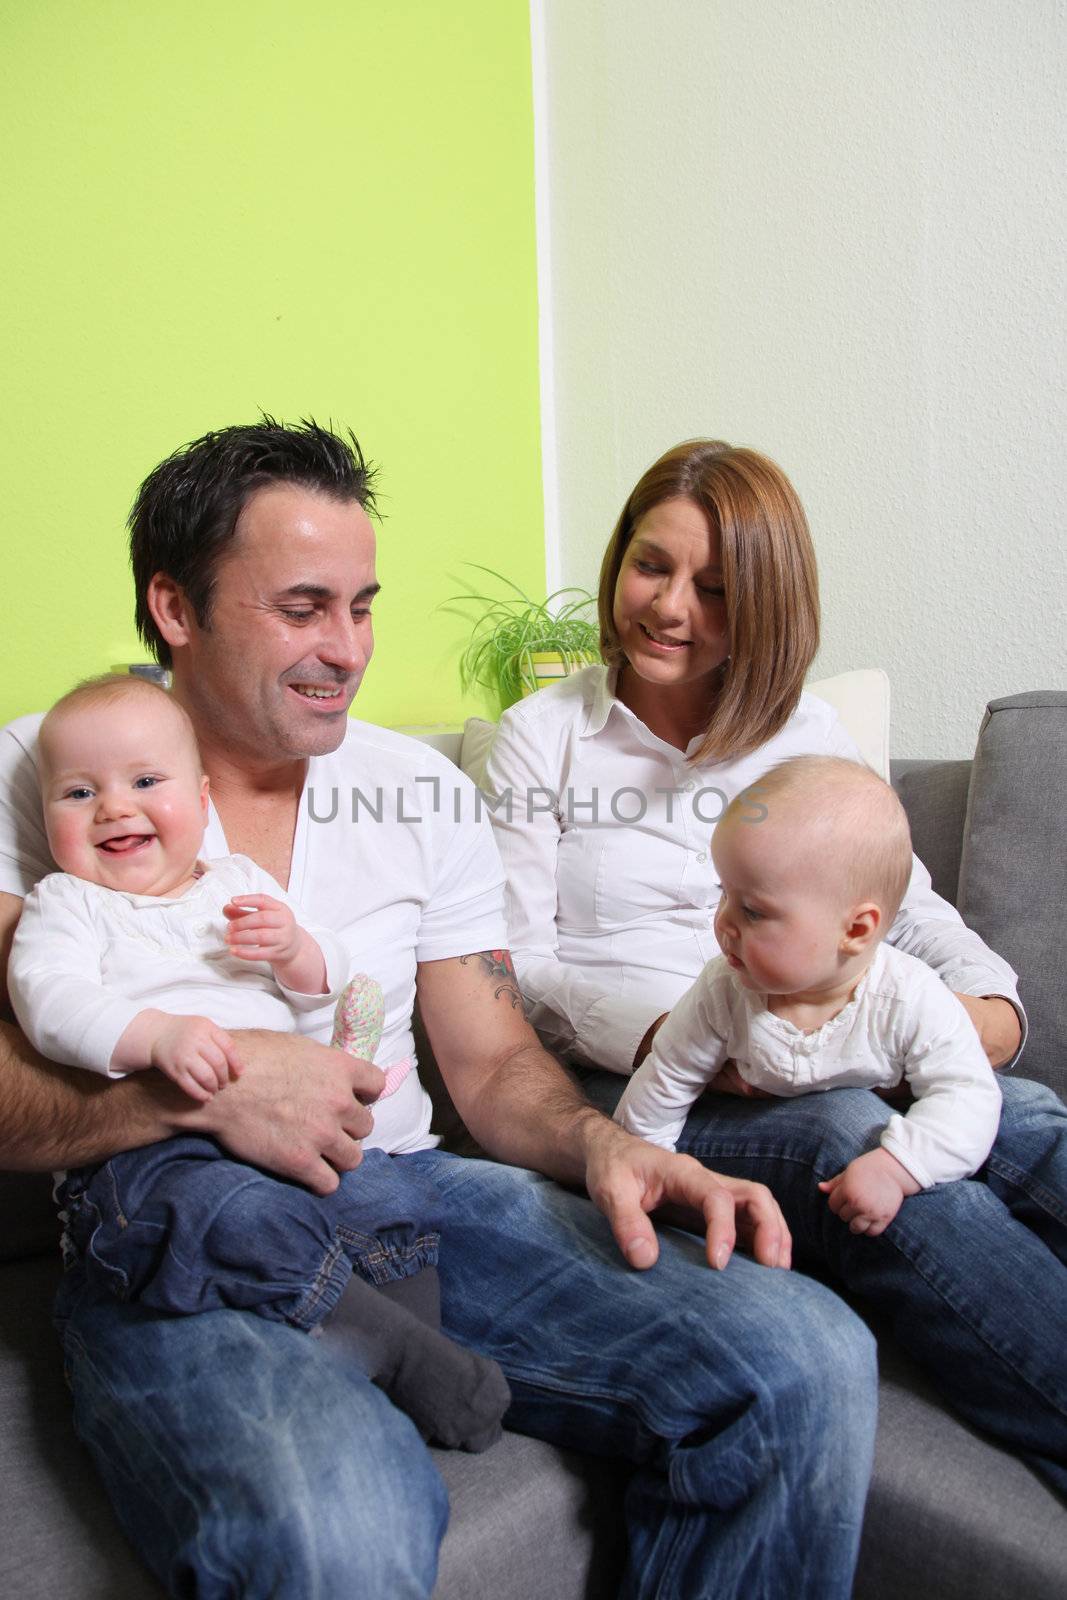 Young families with babies - twins. The parents and the baby laugh friendly and happy.
